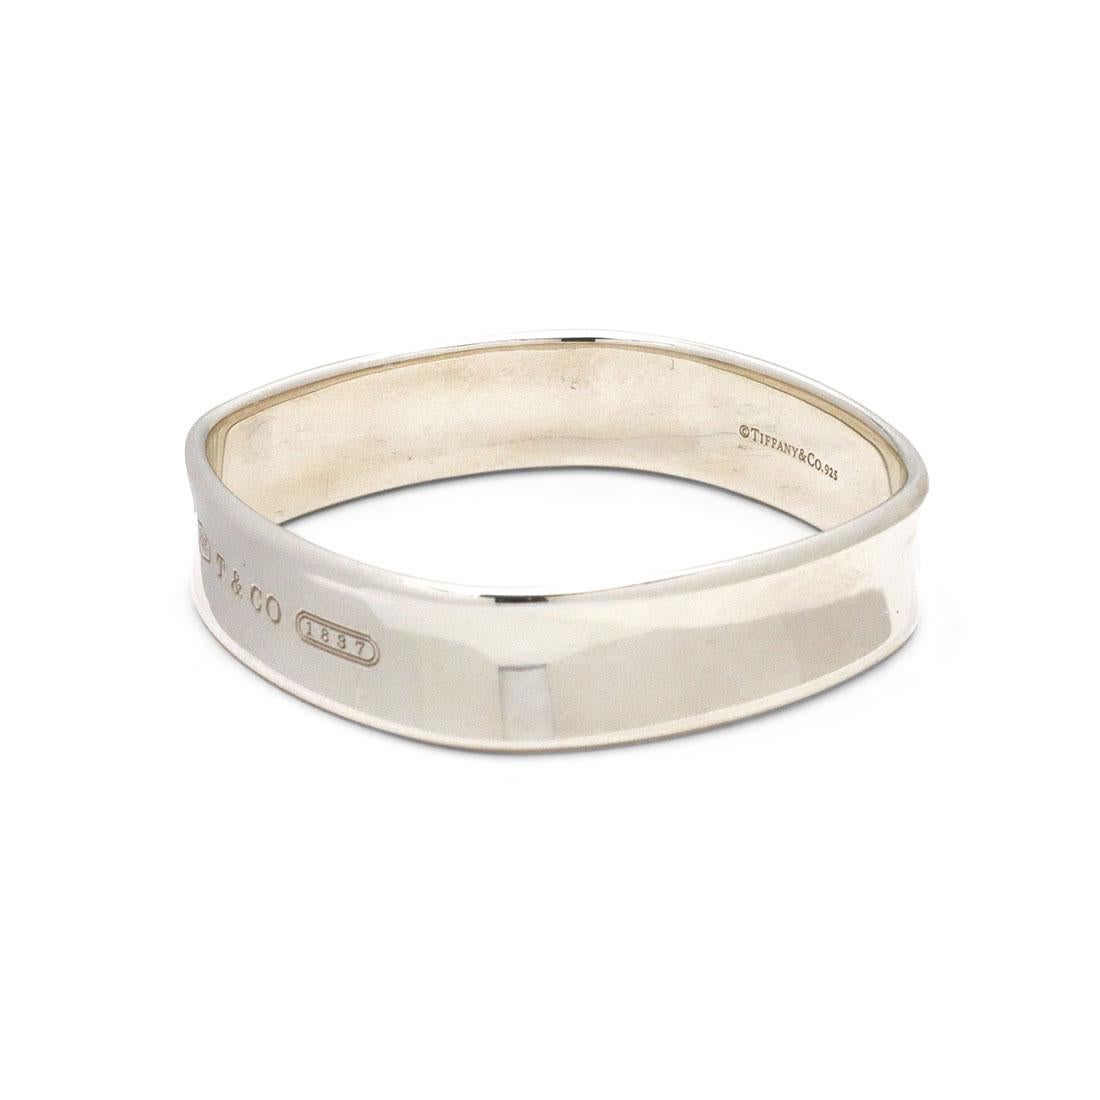 Authentic Tiffany & Co. Bracelet crafted in sterling silver. The bracelet is slightly square in shape and measures 14mm wide. The bracelet is stamped 925 and signed Tiffany & Co. on the inside. The bracelet highlights a 925 stamp, T & CO signature